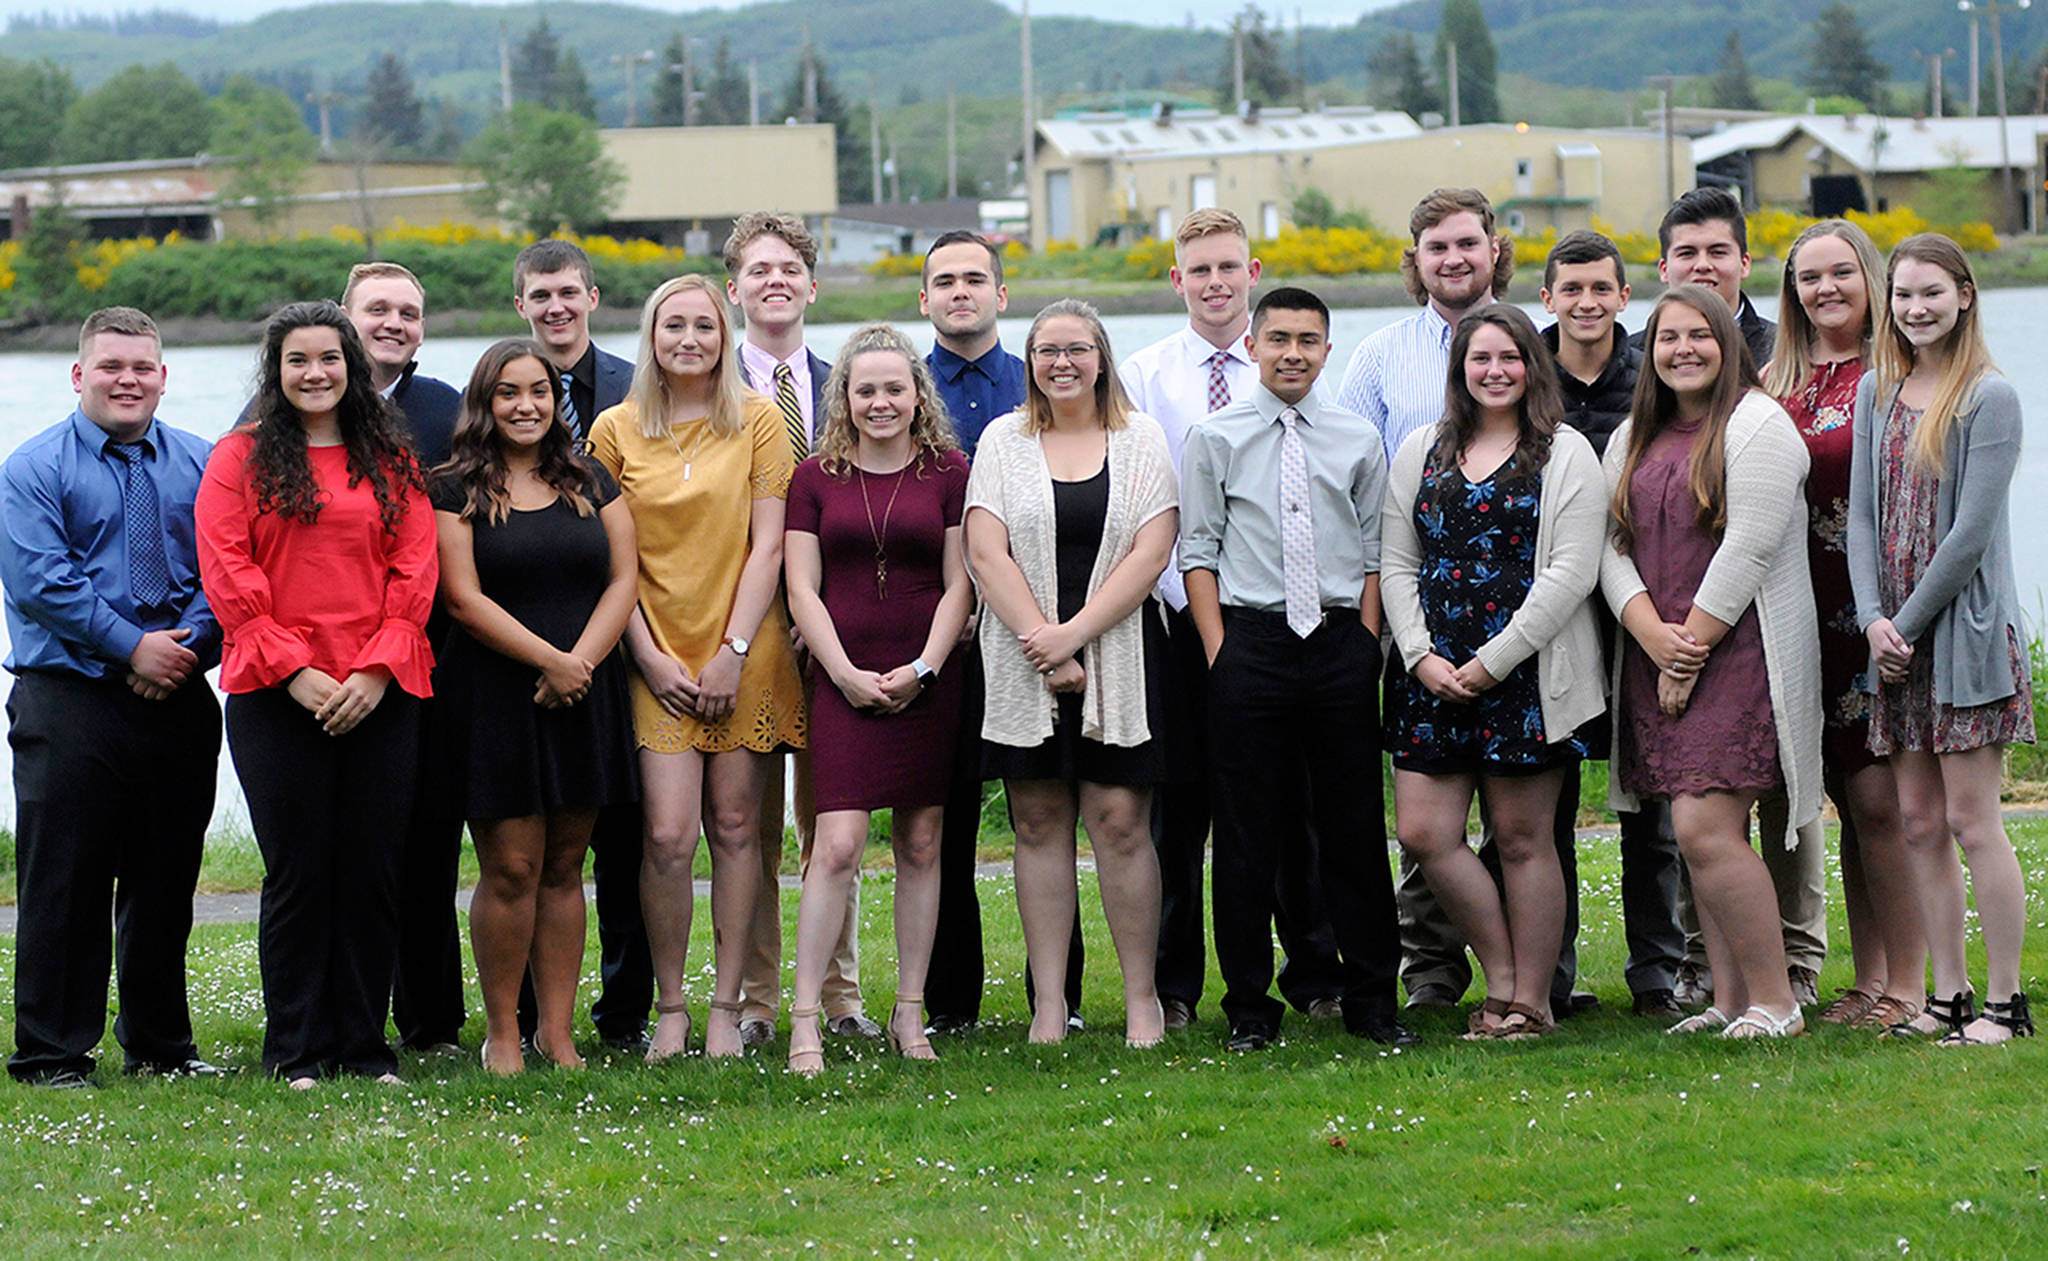 LOUIS KRAUSS | THE DAILY WORLD                                These 20 students from Aberdeen and Hoquiam High School were honored for their commitment to community service at Thursday’s Silver and Gold Banquet:                                Boys, from left, Skyler Murray, Nick Crocker, Brendan King, Eric Beard, Patric Haerle, Jake Gordon, Carlos Juarez, Walker Dunn, Naz Mazariegos, and Bryan Morales-Montes. Girls, from left, Rachel Tageant, Bailey Flores, Holland Bergeson, Bailee Green, Nadia Wirta, Chloe Graham-Briscoe, McKenna Boone, Mariah Fuller, Mercedes Pinnell, and Karlie Krohn (not pictured).